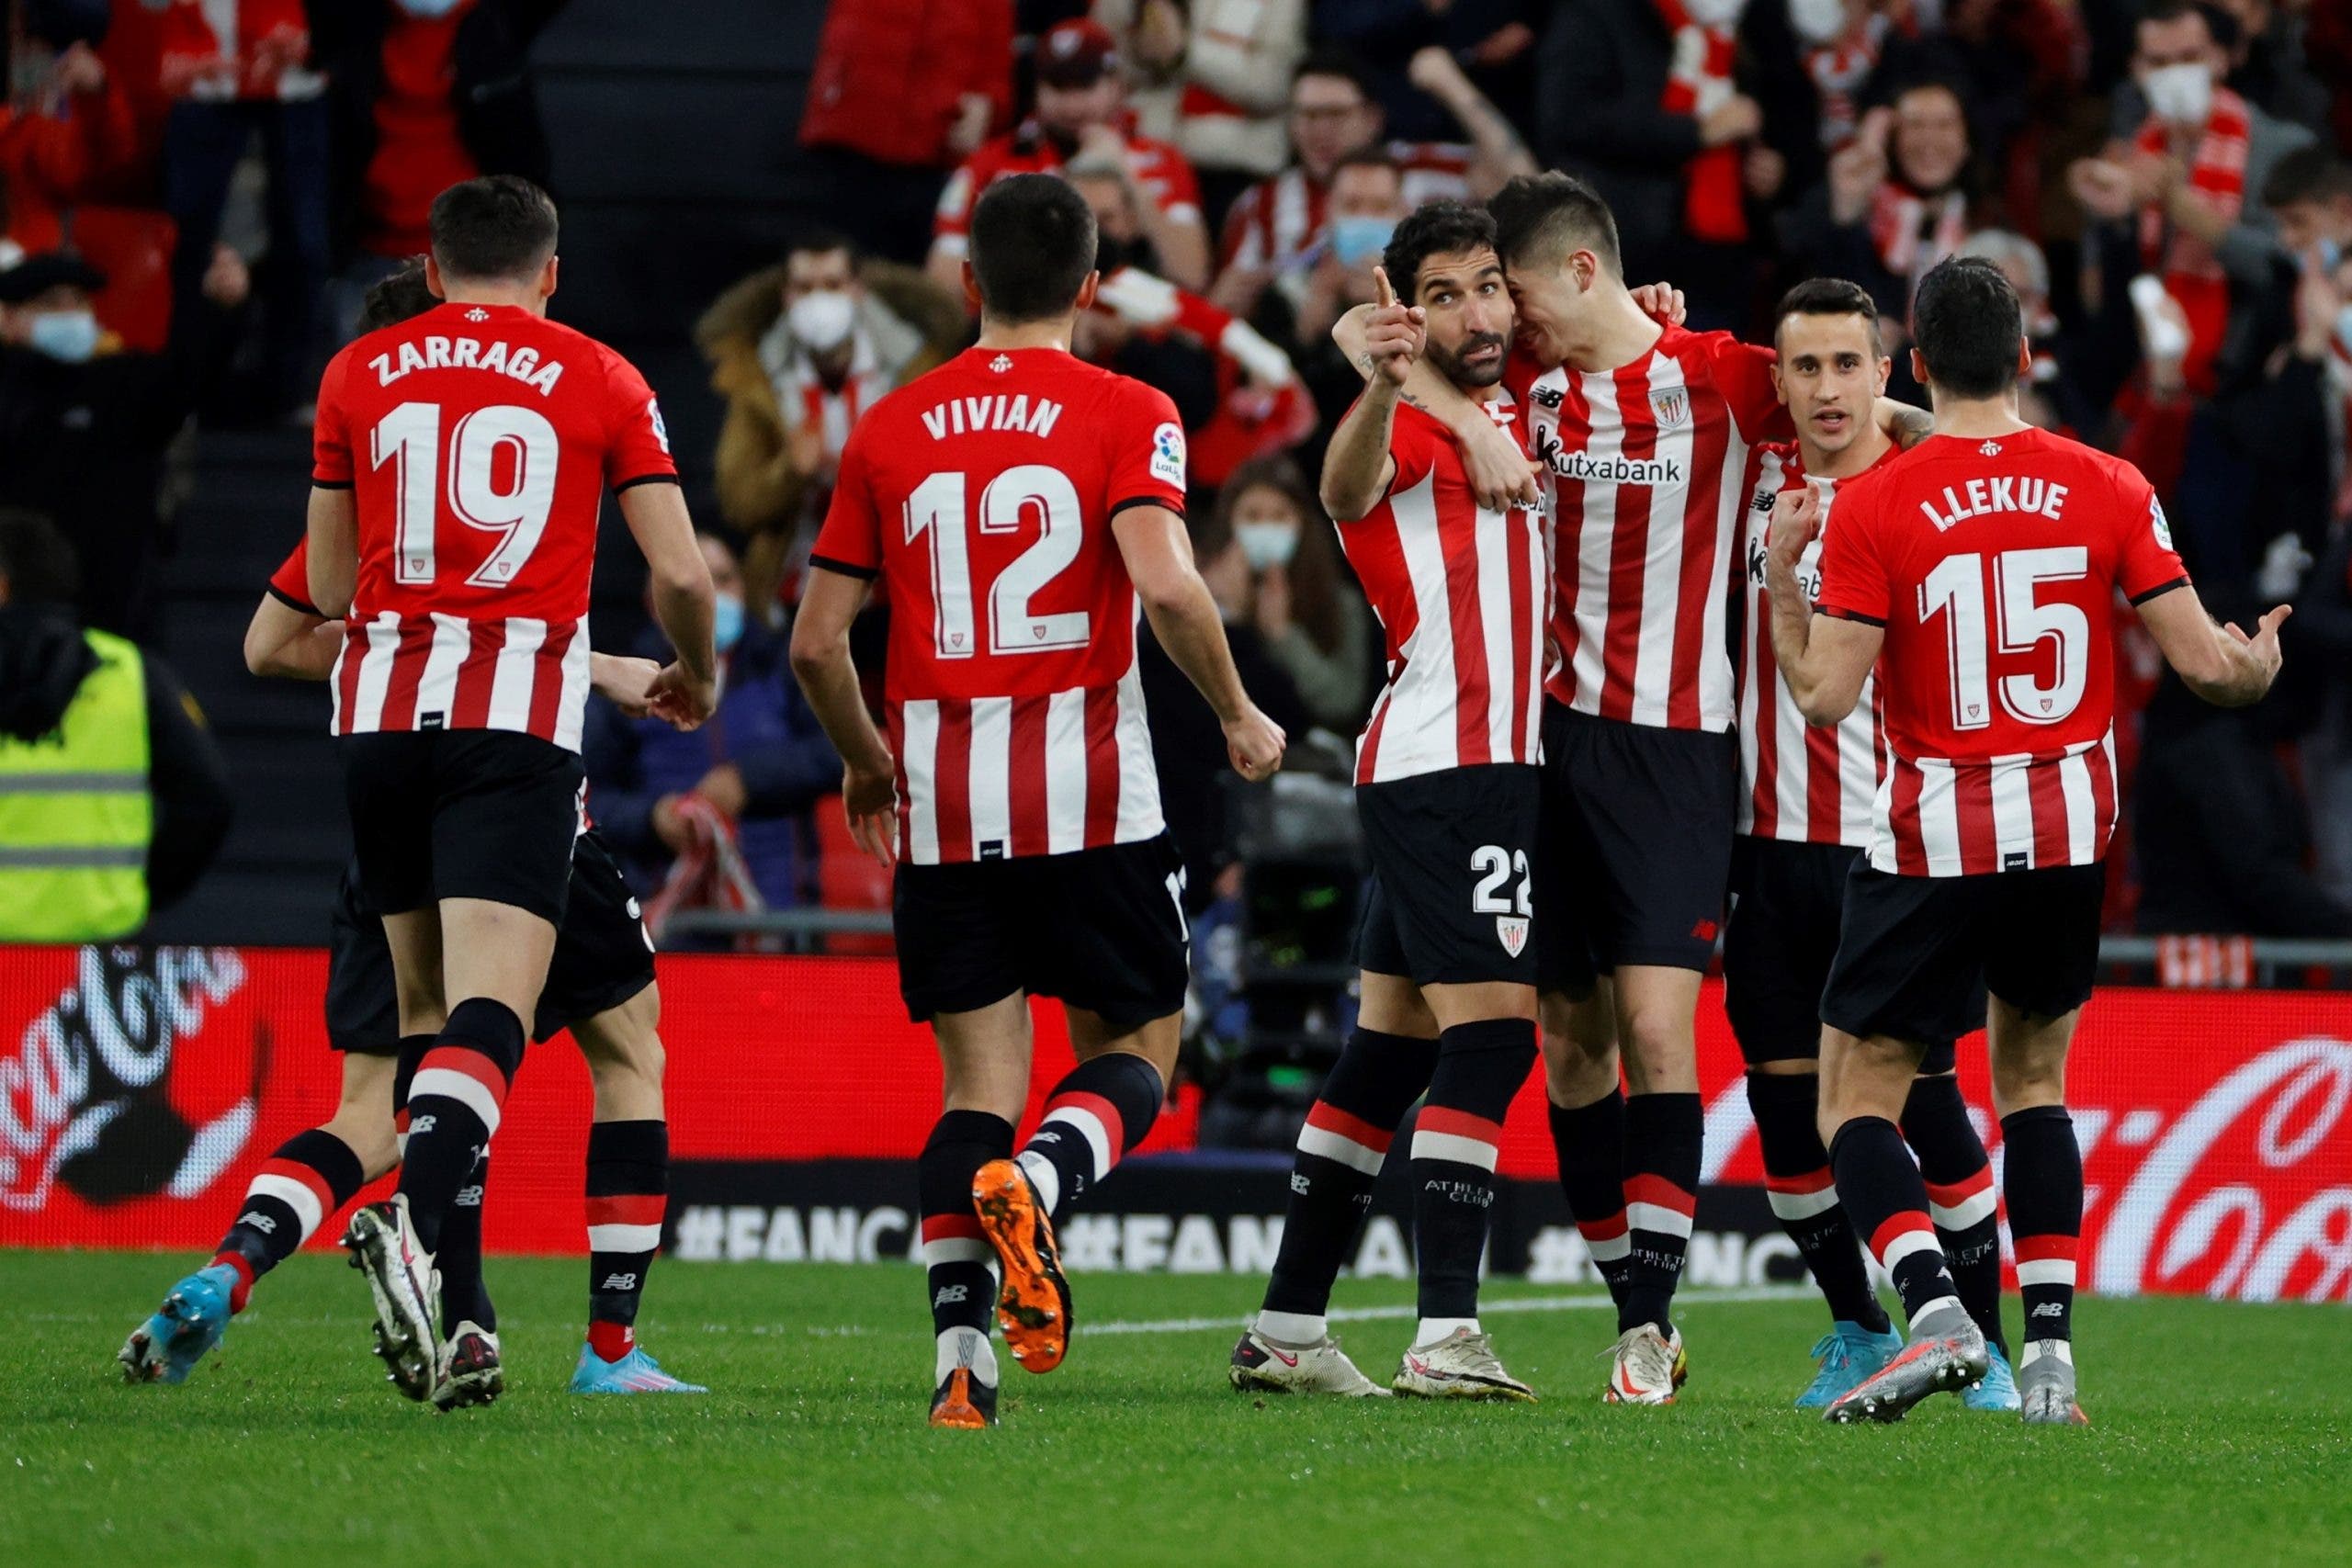 How much will Athletic enter for its internationals?
